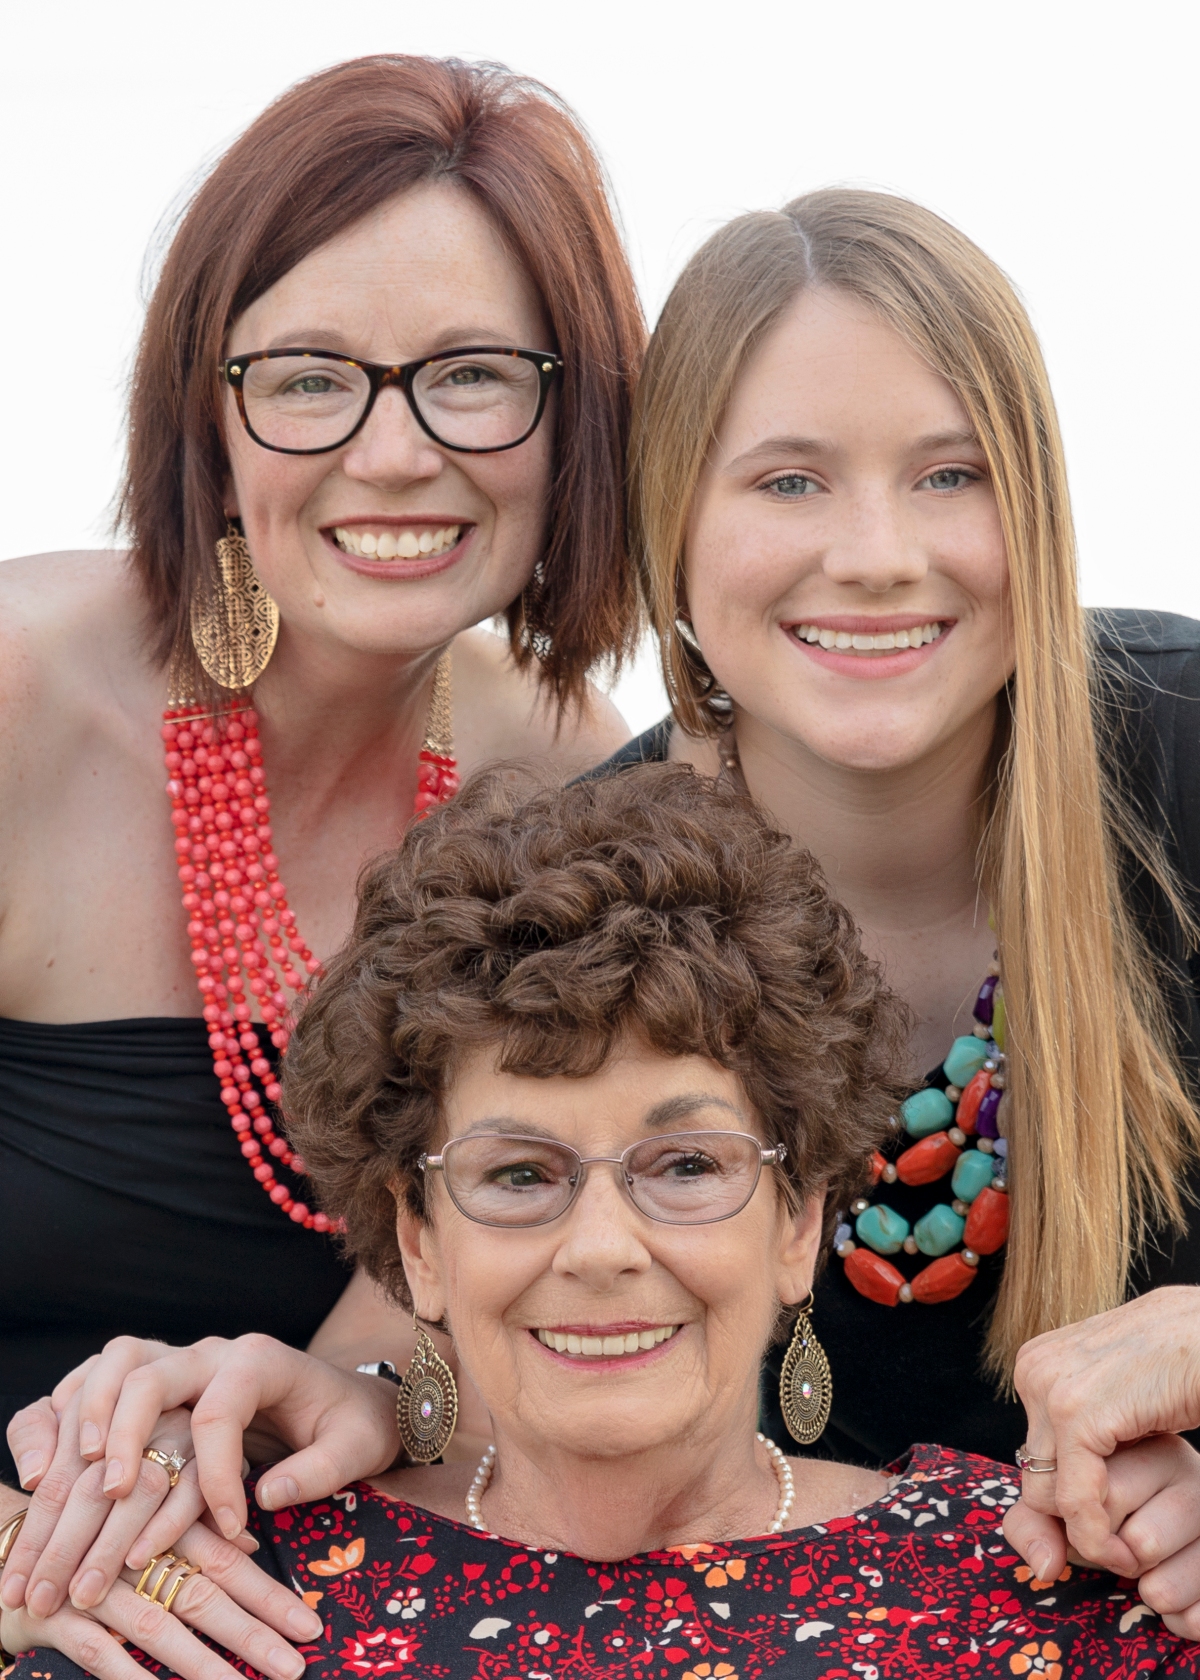 Three generation picture is a keepsake.  So glad we made this session happen!